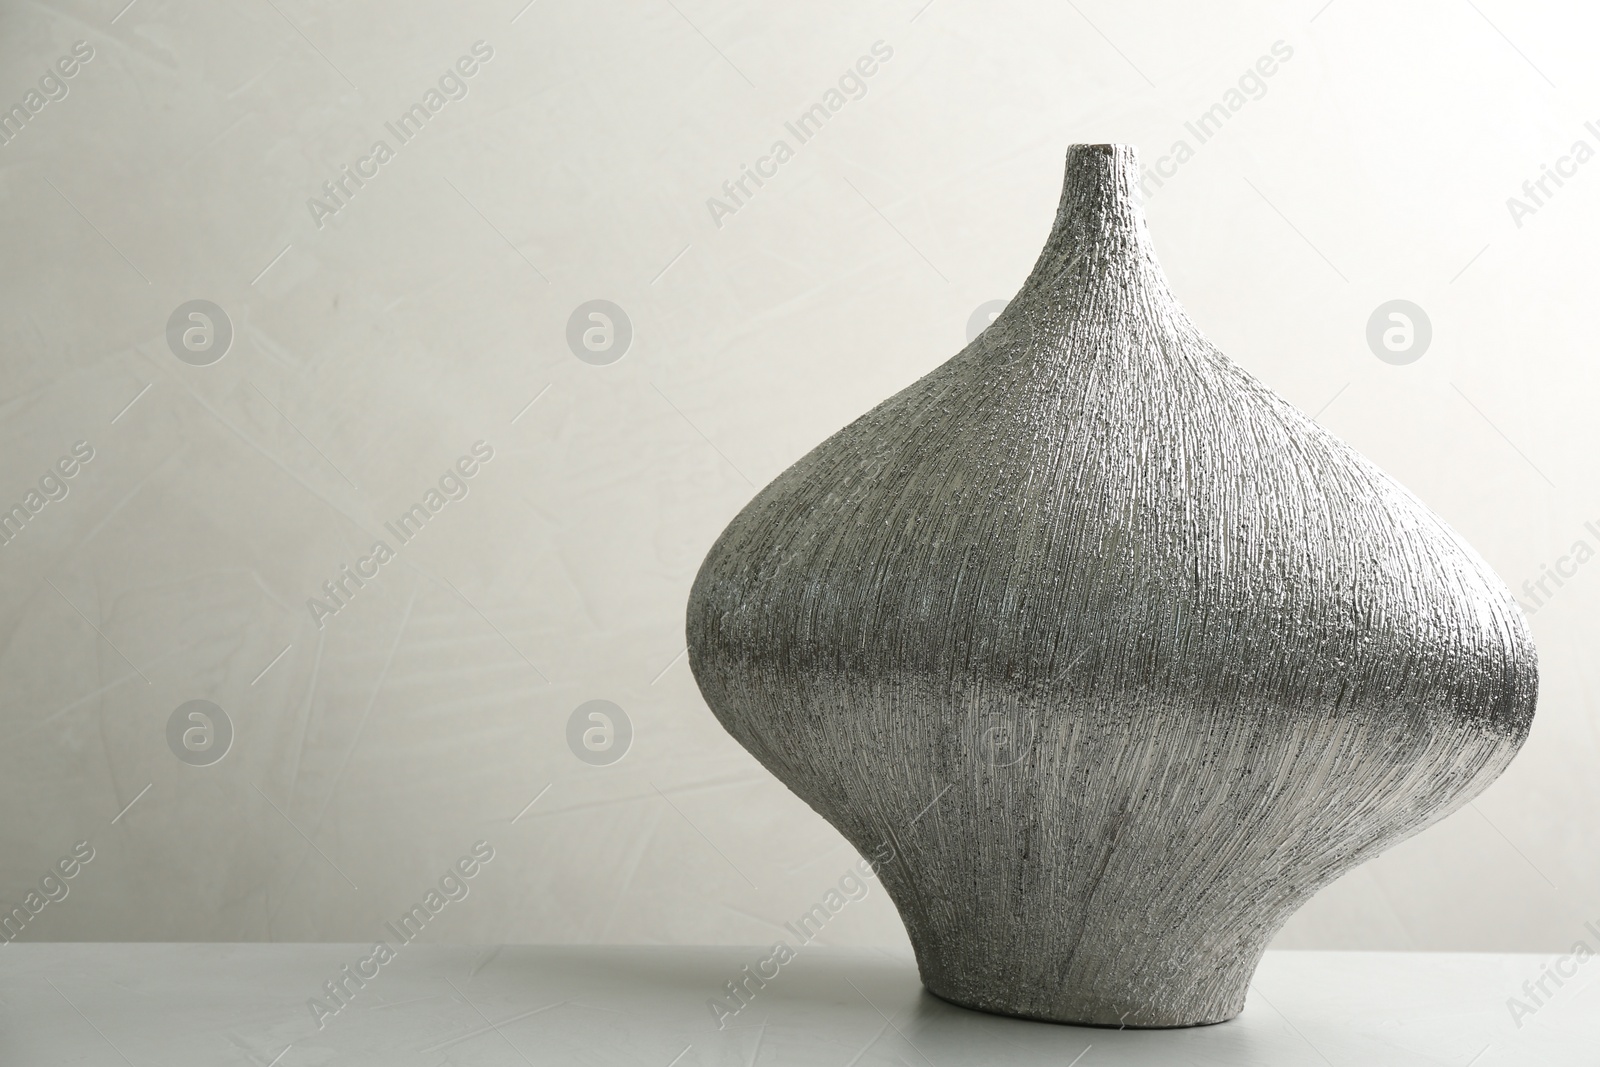 Photo of Stylish ceramic vase on stone table. Space for text